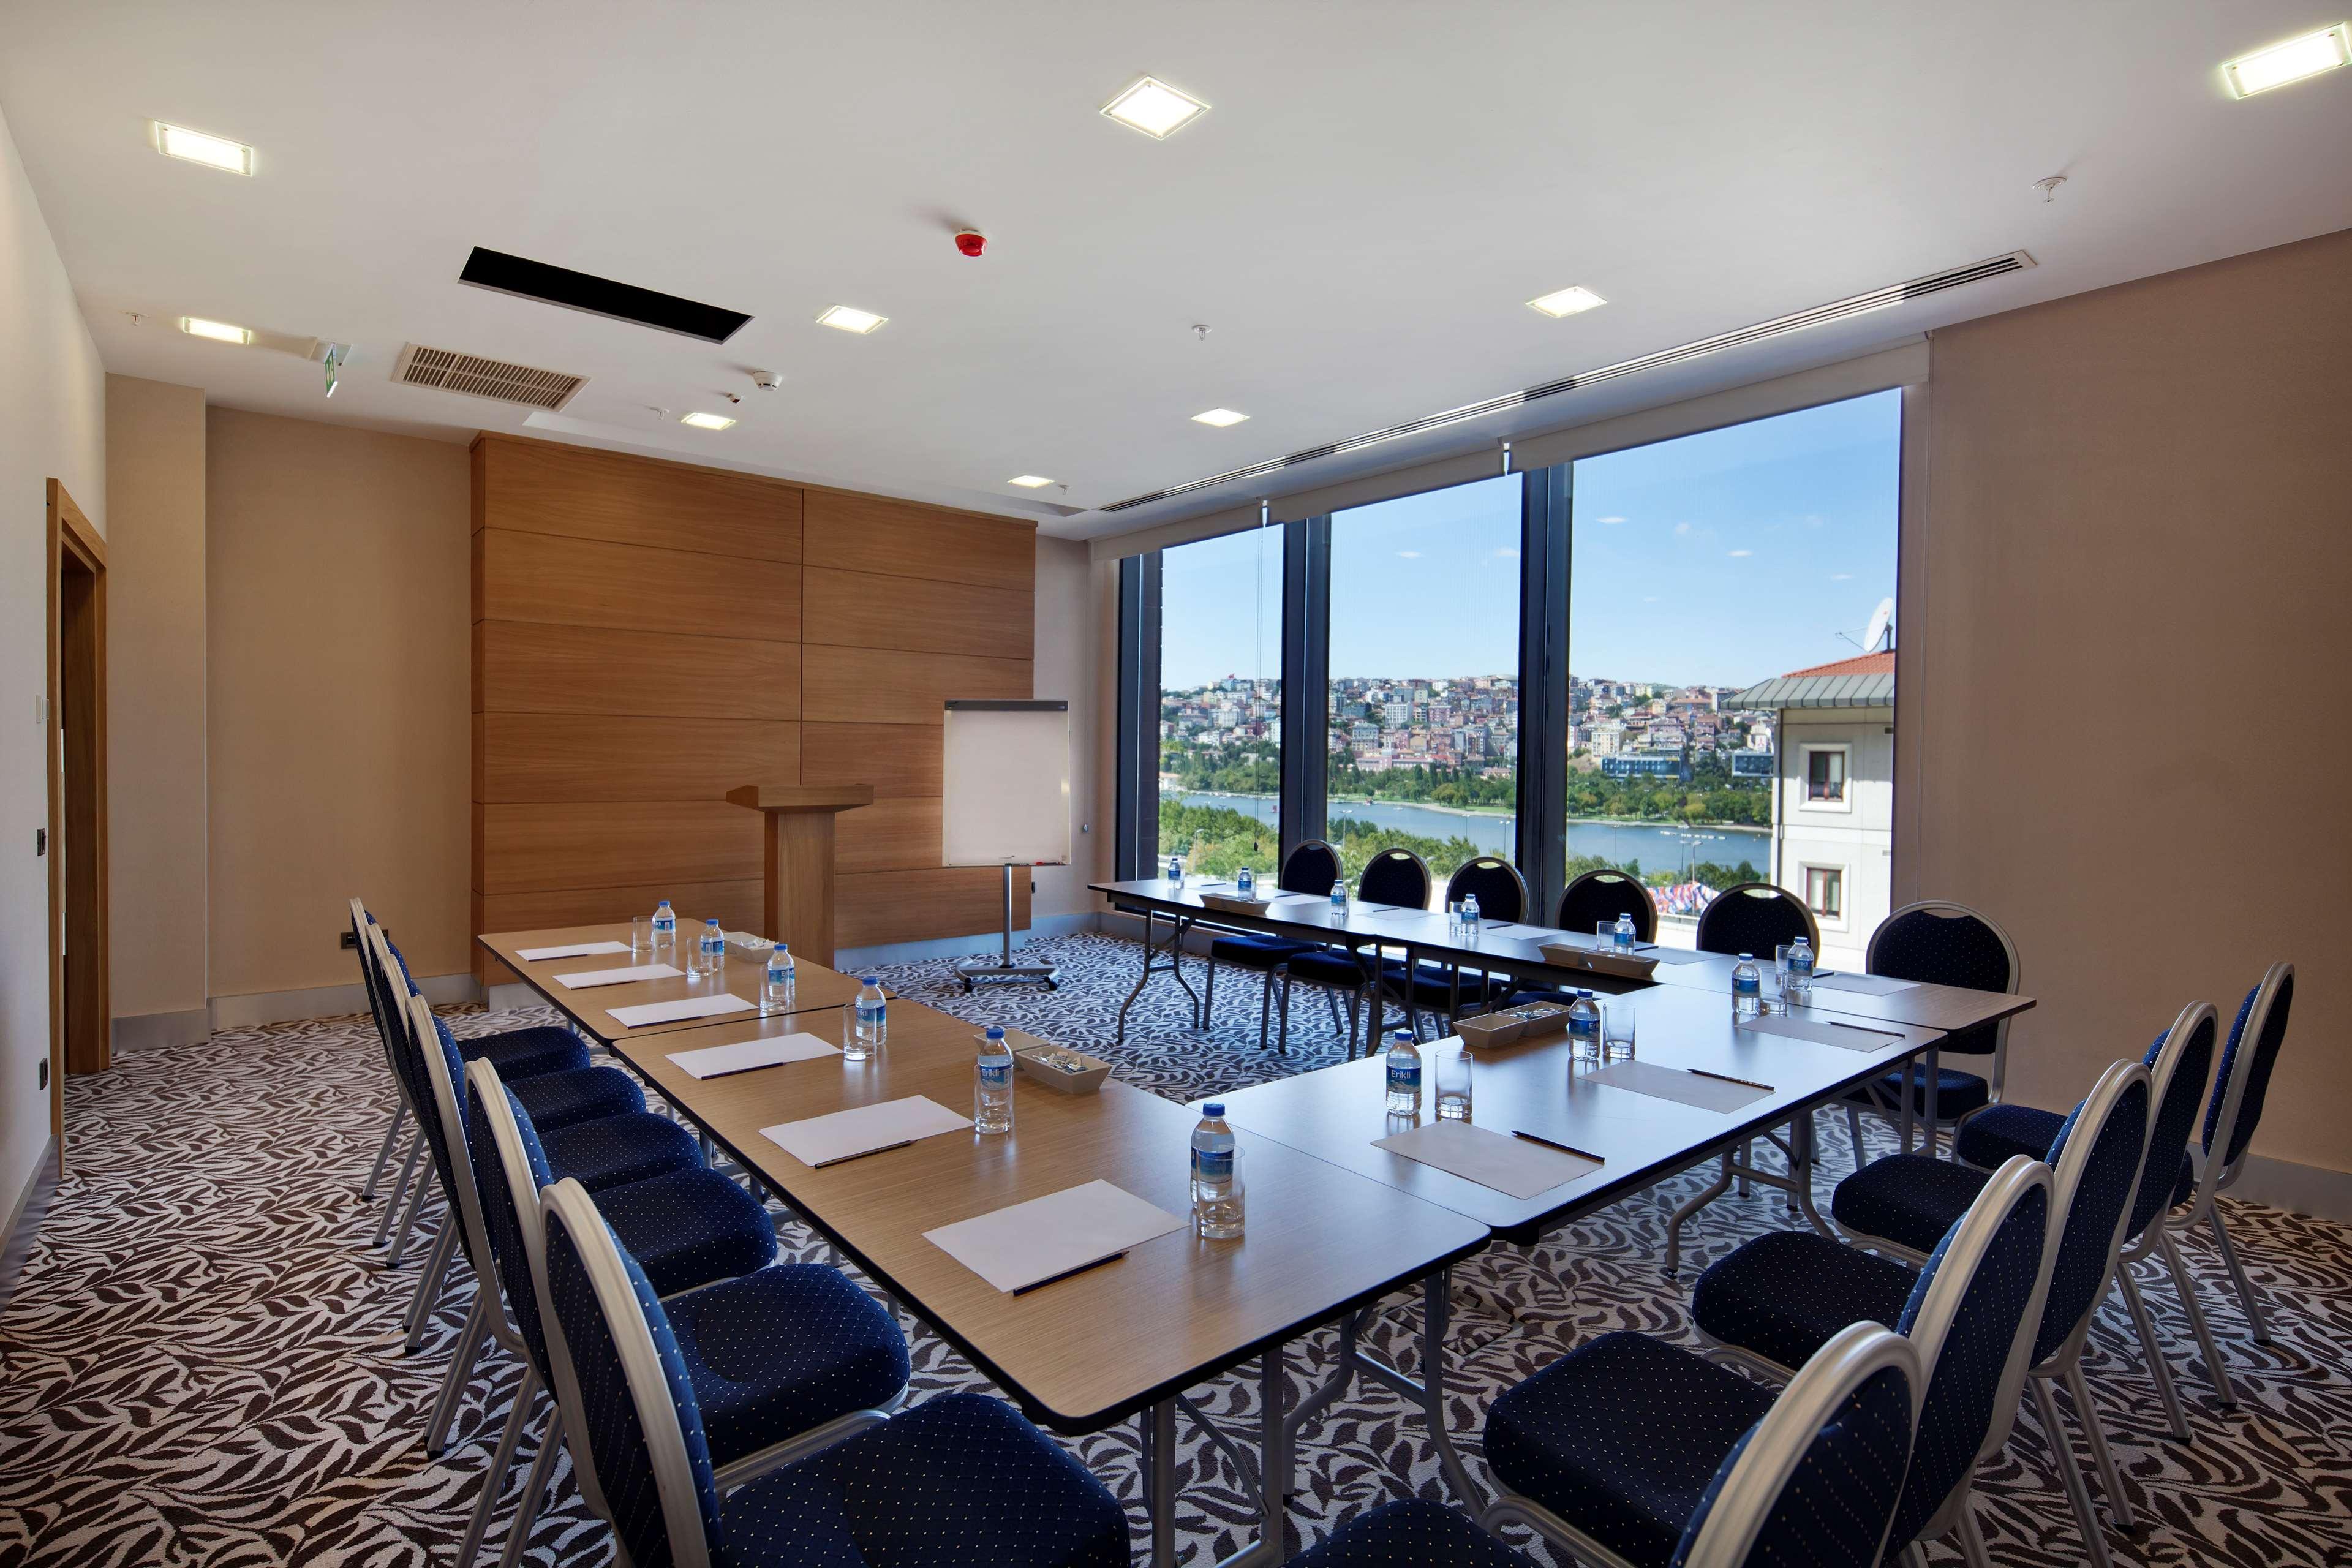 Dosso Dossi Hotels & Spa Golden Horn Istanbul Facilities photo